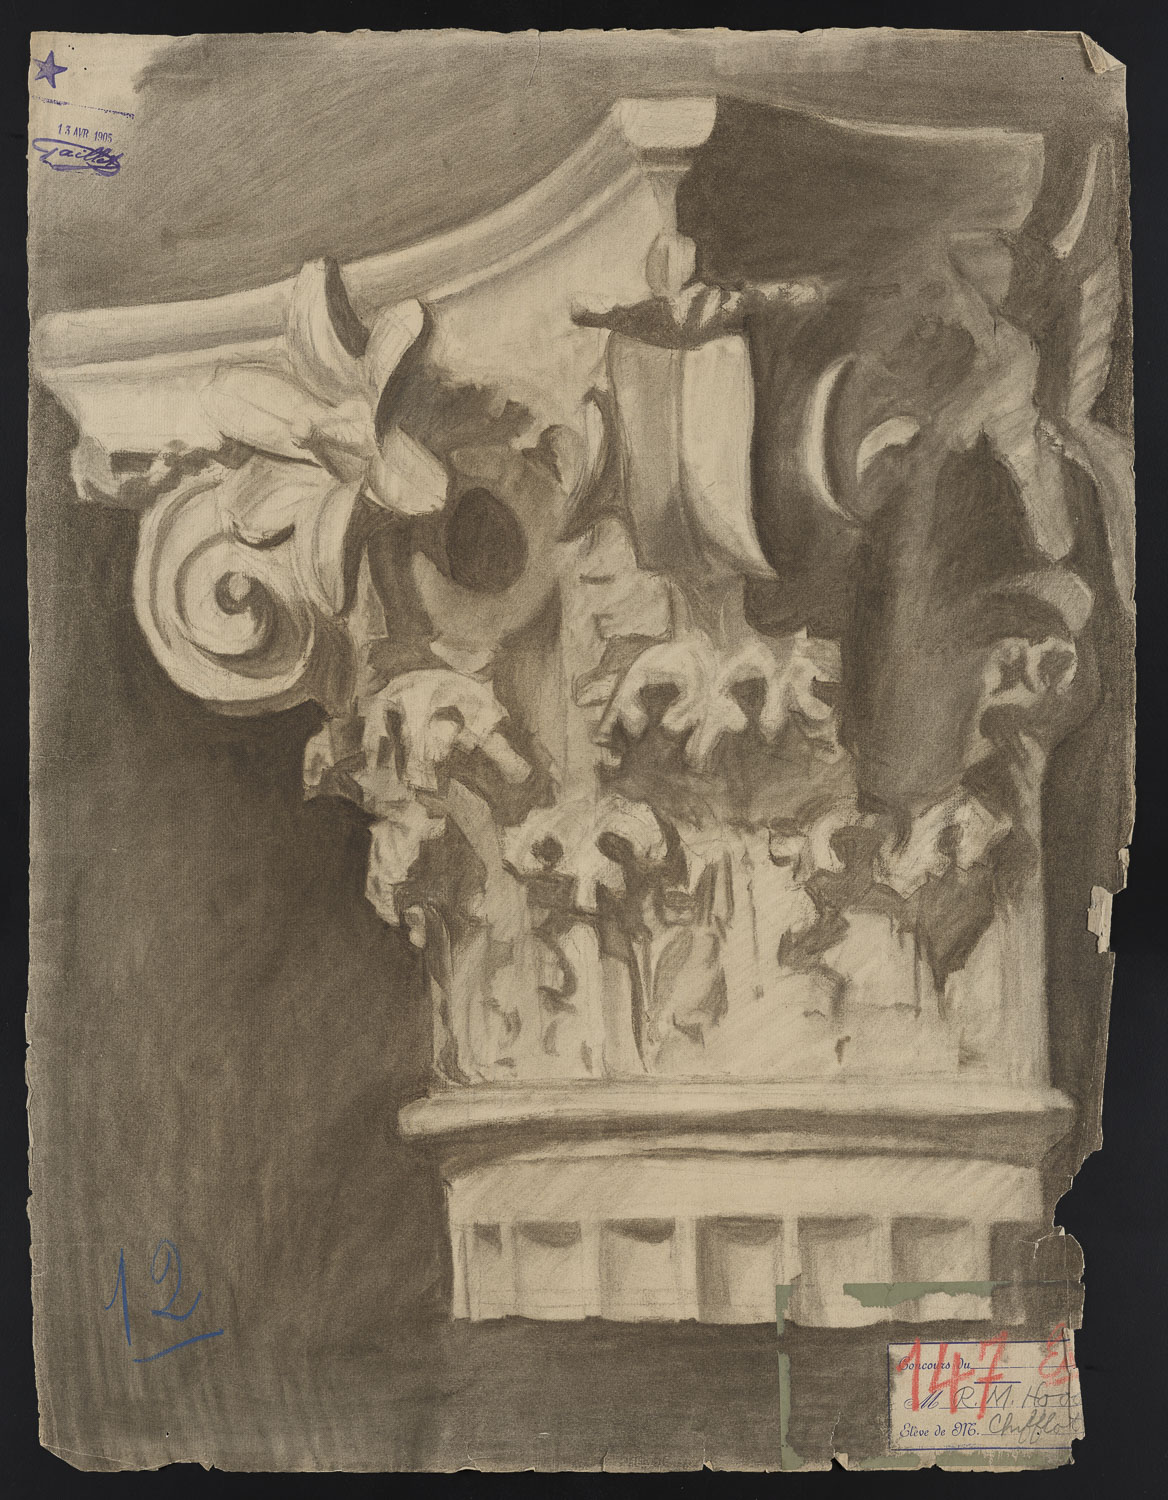 A drawing of the capital of a composite-style column decorated with leaves and curved forms. The light column and capital stand against a dark background. The capital is cut off by the right side of the paper. A purple date stamp in the upper left and red crayon marks in the lower right interrupt the otherwise black and white drawing.